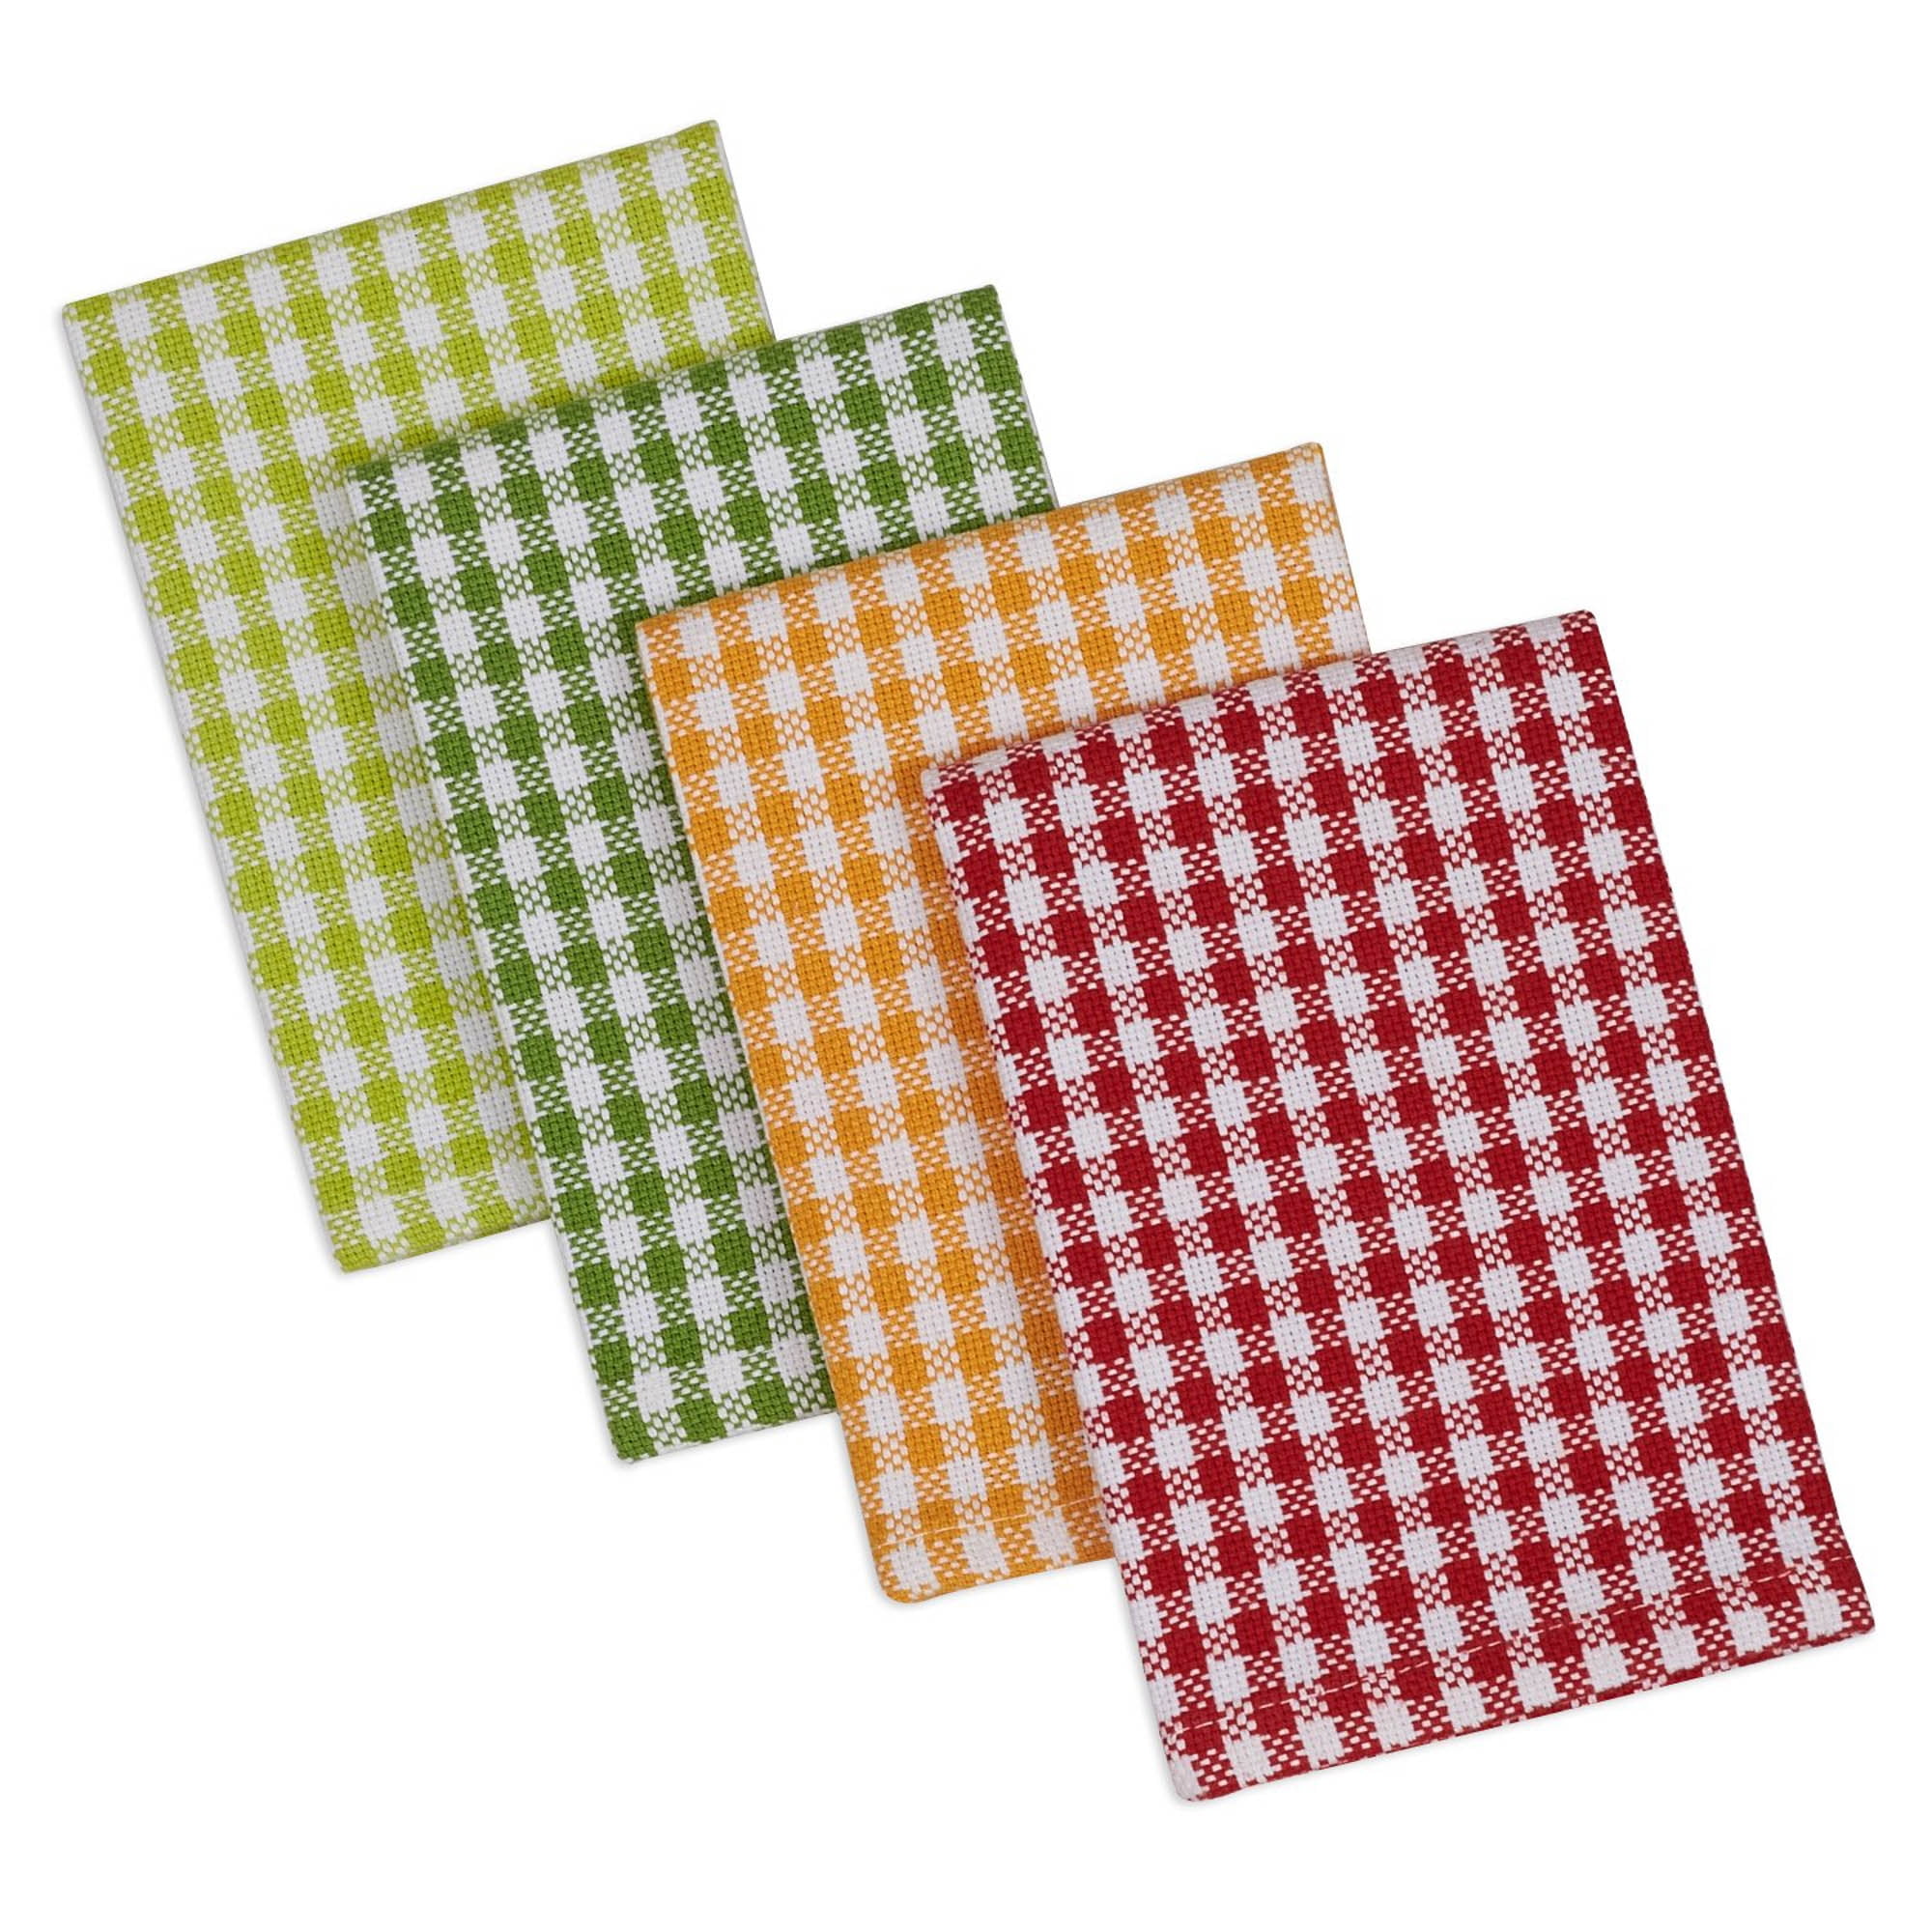 Design Imports Camz34777 Pea Patch Check Heavyweight Dishcloth - Set Of 4